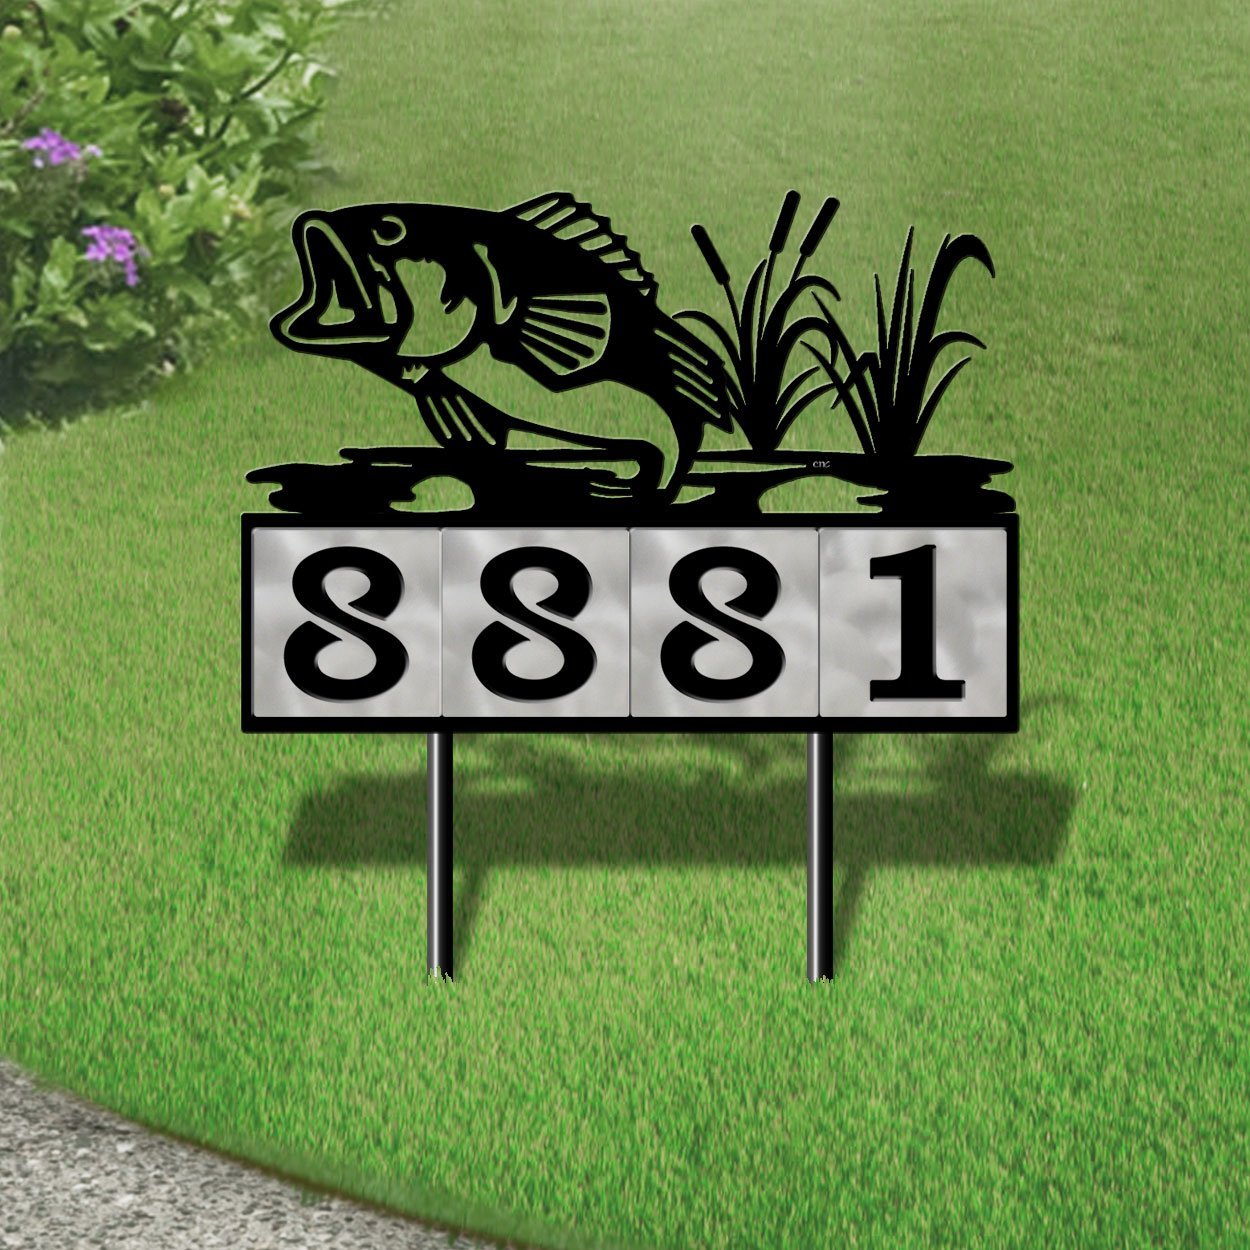 610004 - Bass in Reeds 4-Digit Horizontal 6in Tiles Yard Sign